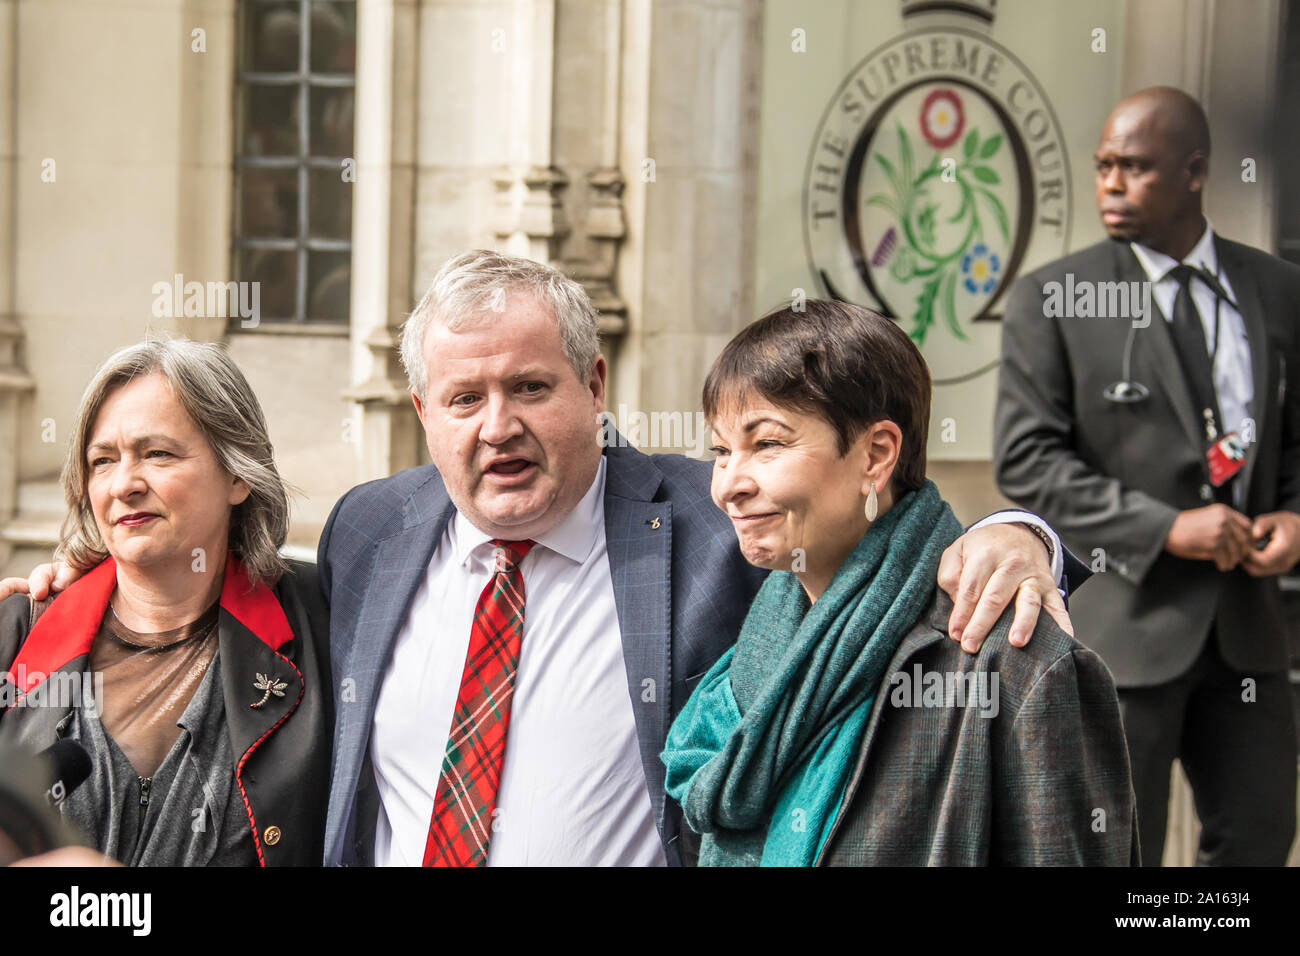 London, UK. 24th Sep, 2019. Plaid Cymru MP Liz Saville-Roberts (L) Scottish National Party leader in the House of Commons Ian Blackford (C) and Green Party MP Caroline Lucas outside The Supreme Court after the ruling that the Boris Johnson's Government acted unlawful in their proroguation of Parliament. Credit: David Rowe/Alamy Live News Stock Photo